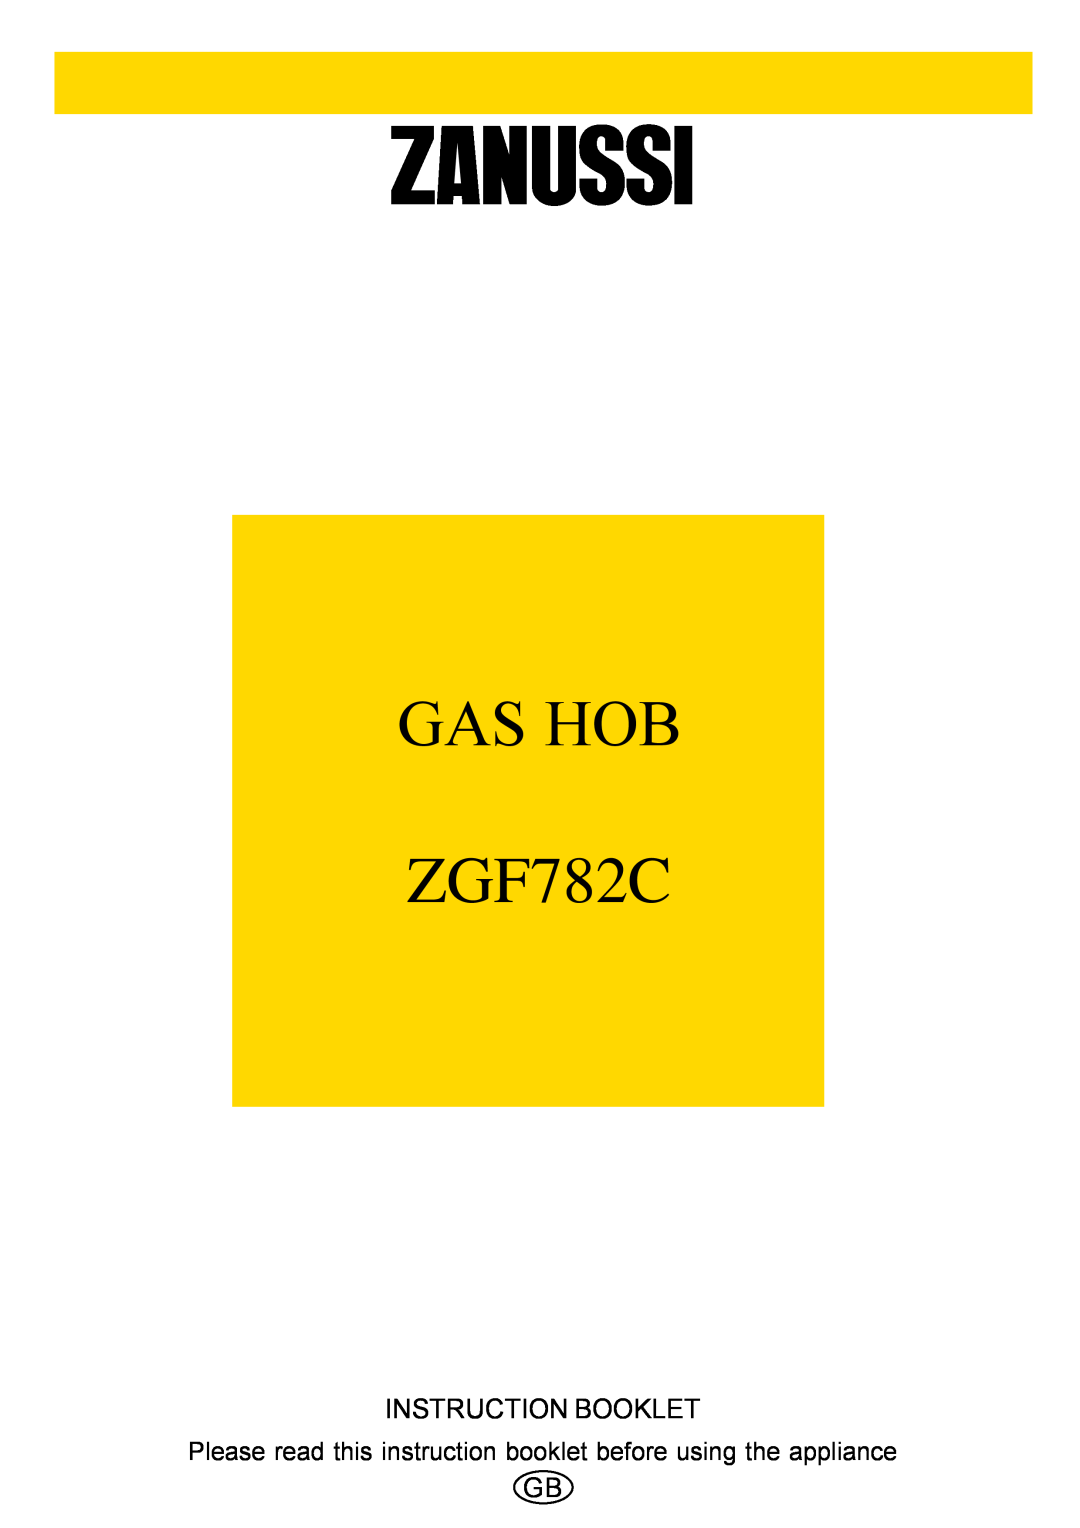 Zanussi ZGF782C manual Please read this instruction booklet before using the appliance, Gas Hob, Instruction Booklet 